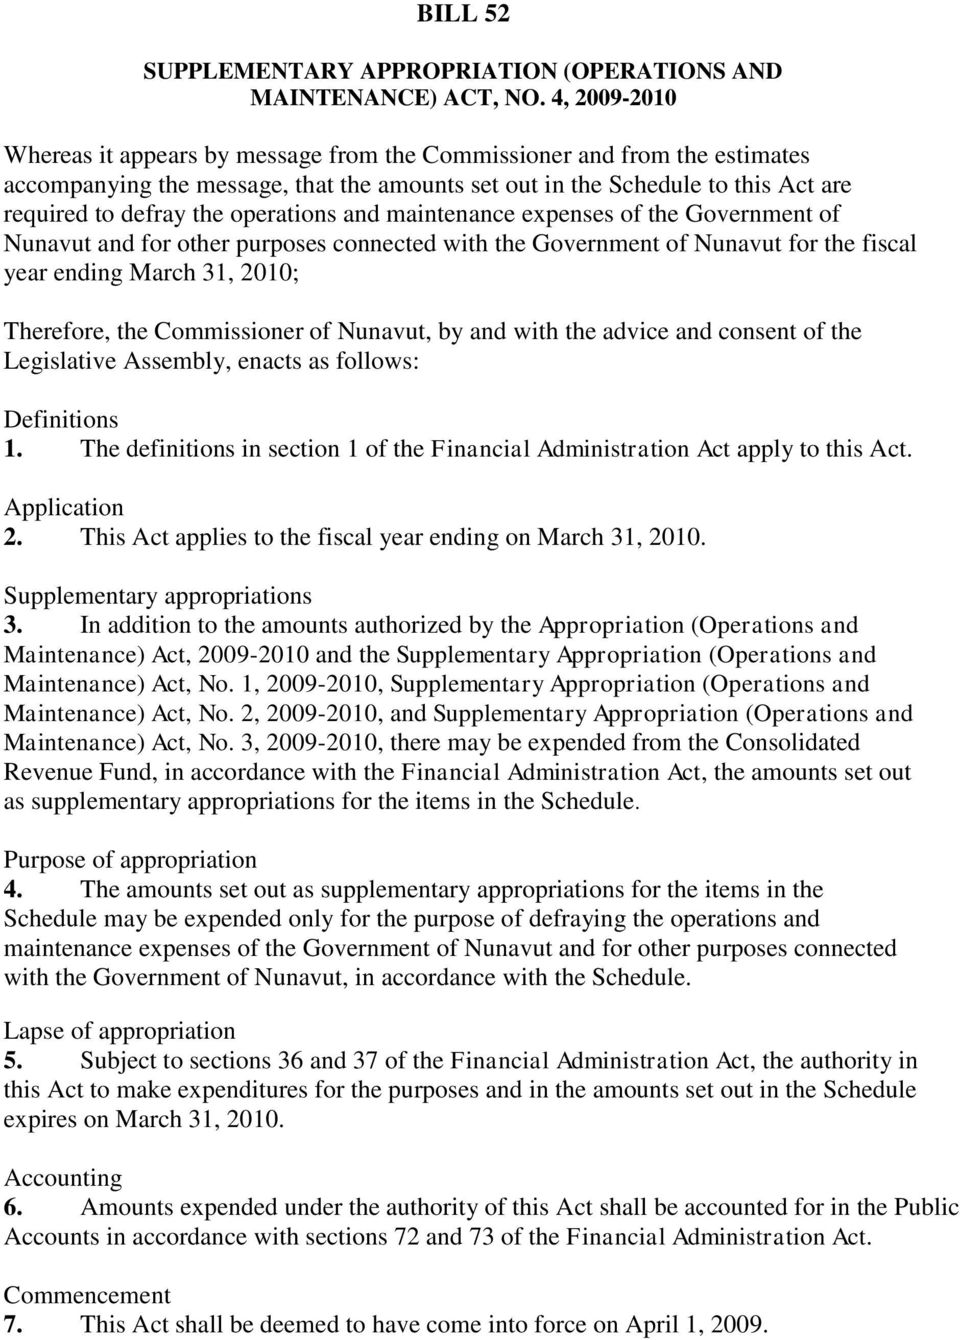 operations and maintenance expenses of the Government of Nunavut and for other purposes connected with the Government of Nunavut for the fiscal year ending March 31, 2010; Therefore, the Commissioner